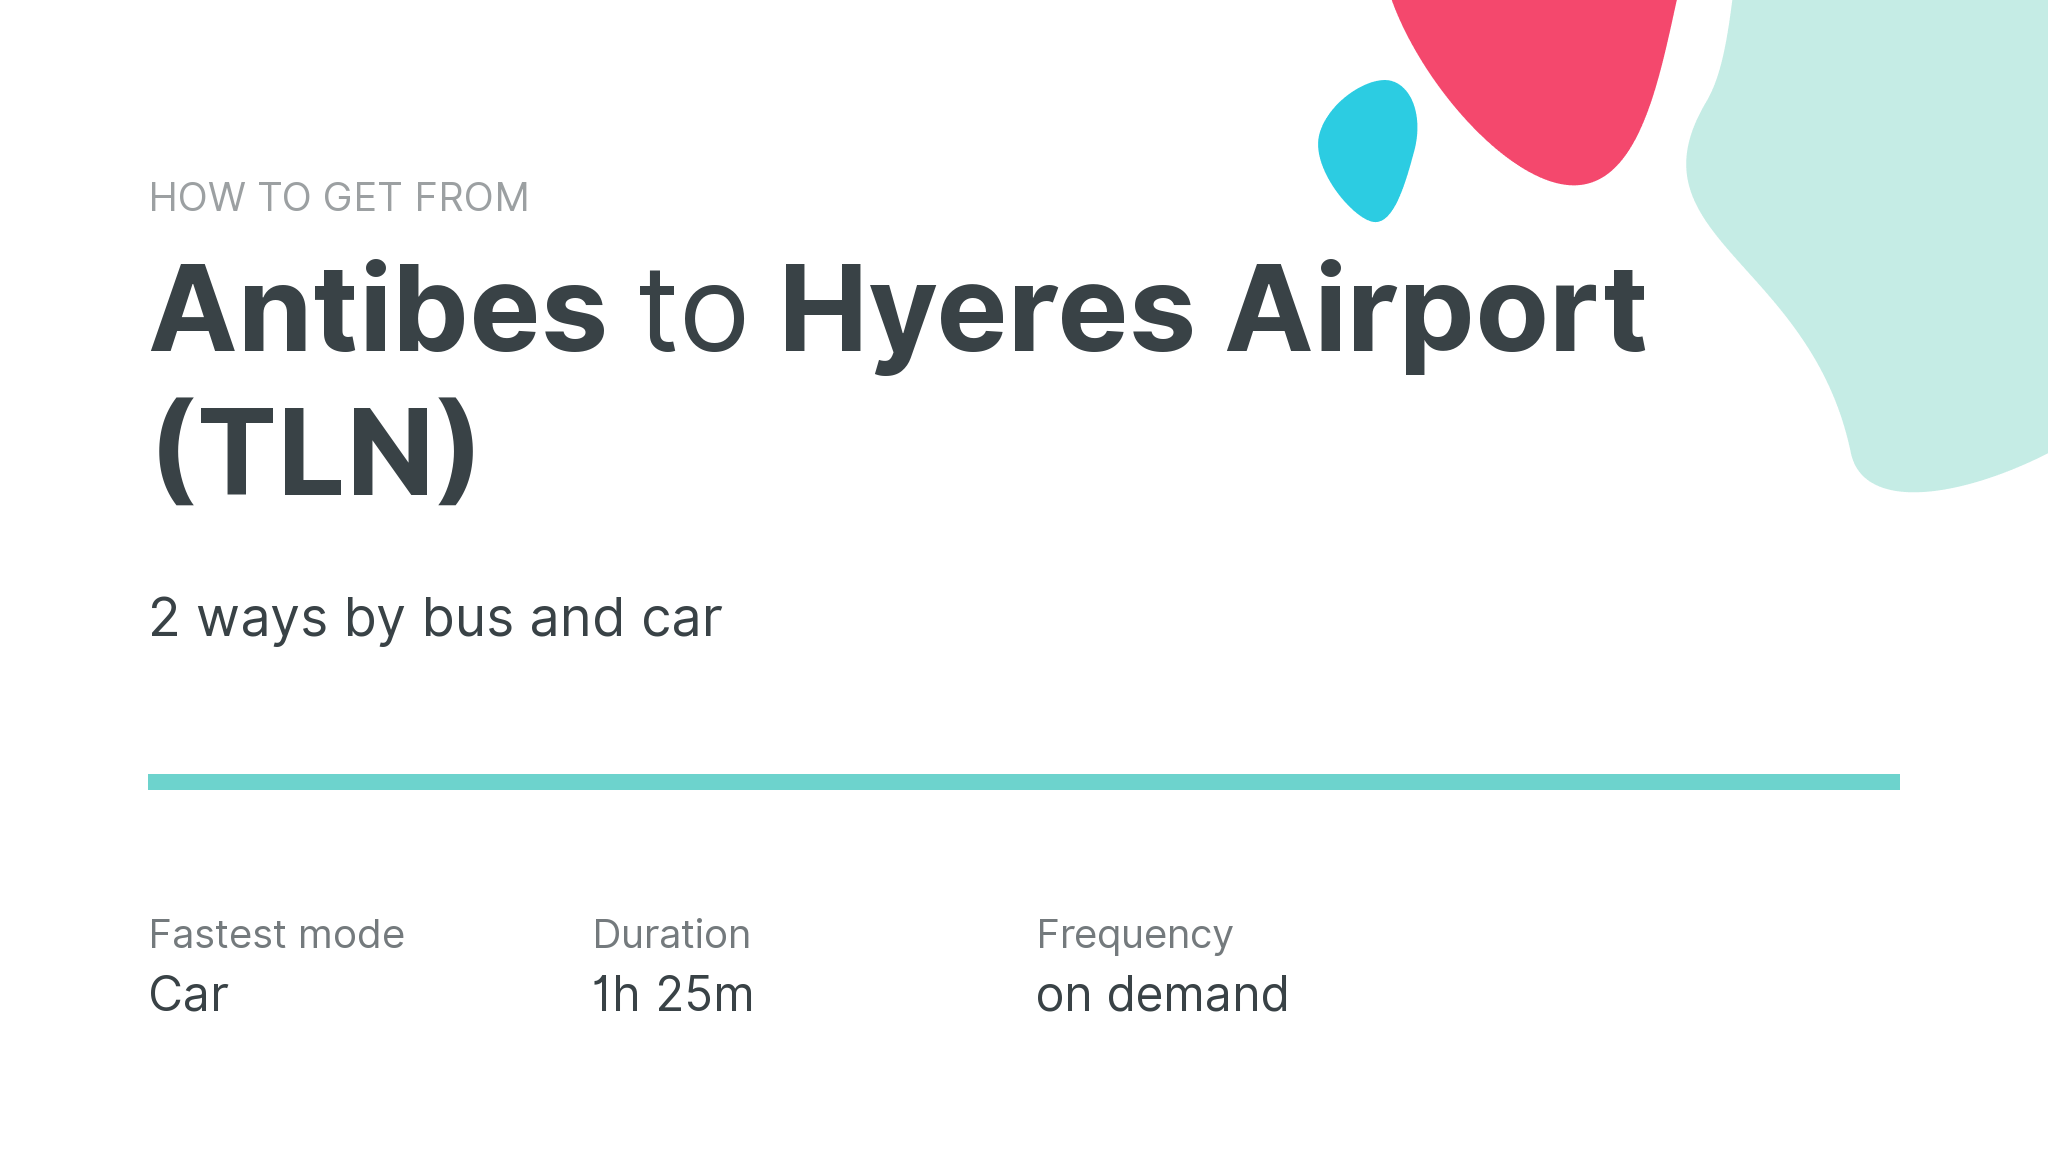 How do I get from Antibes to Hyeres Airport (TLN)